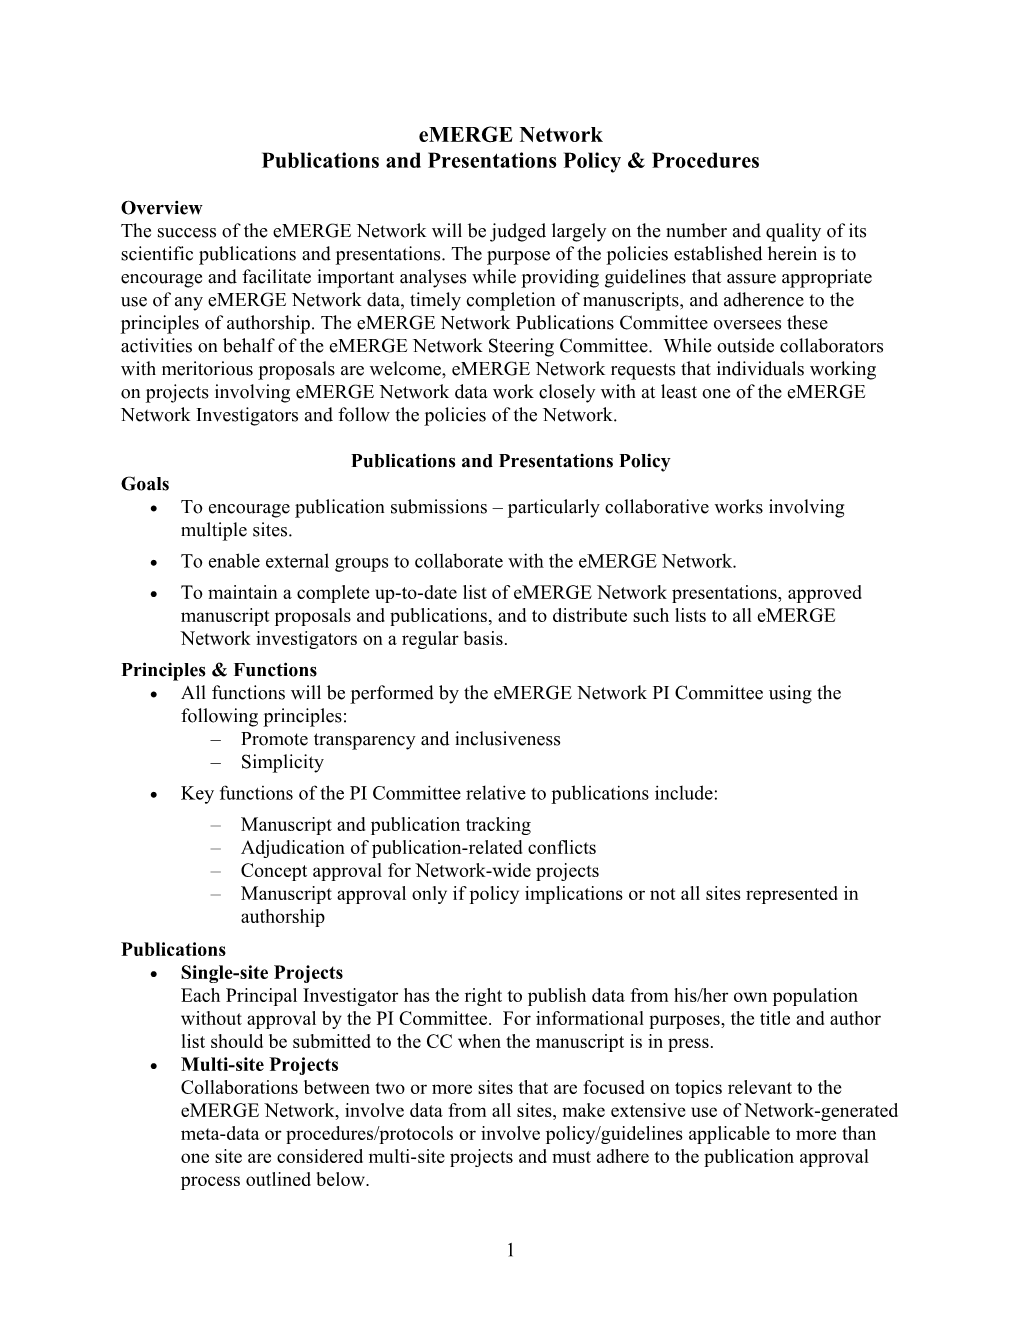 Publications and Presentations Policy & Procedures